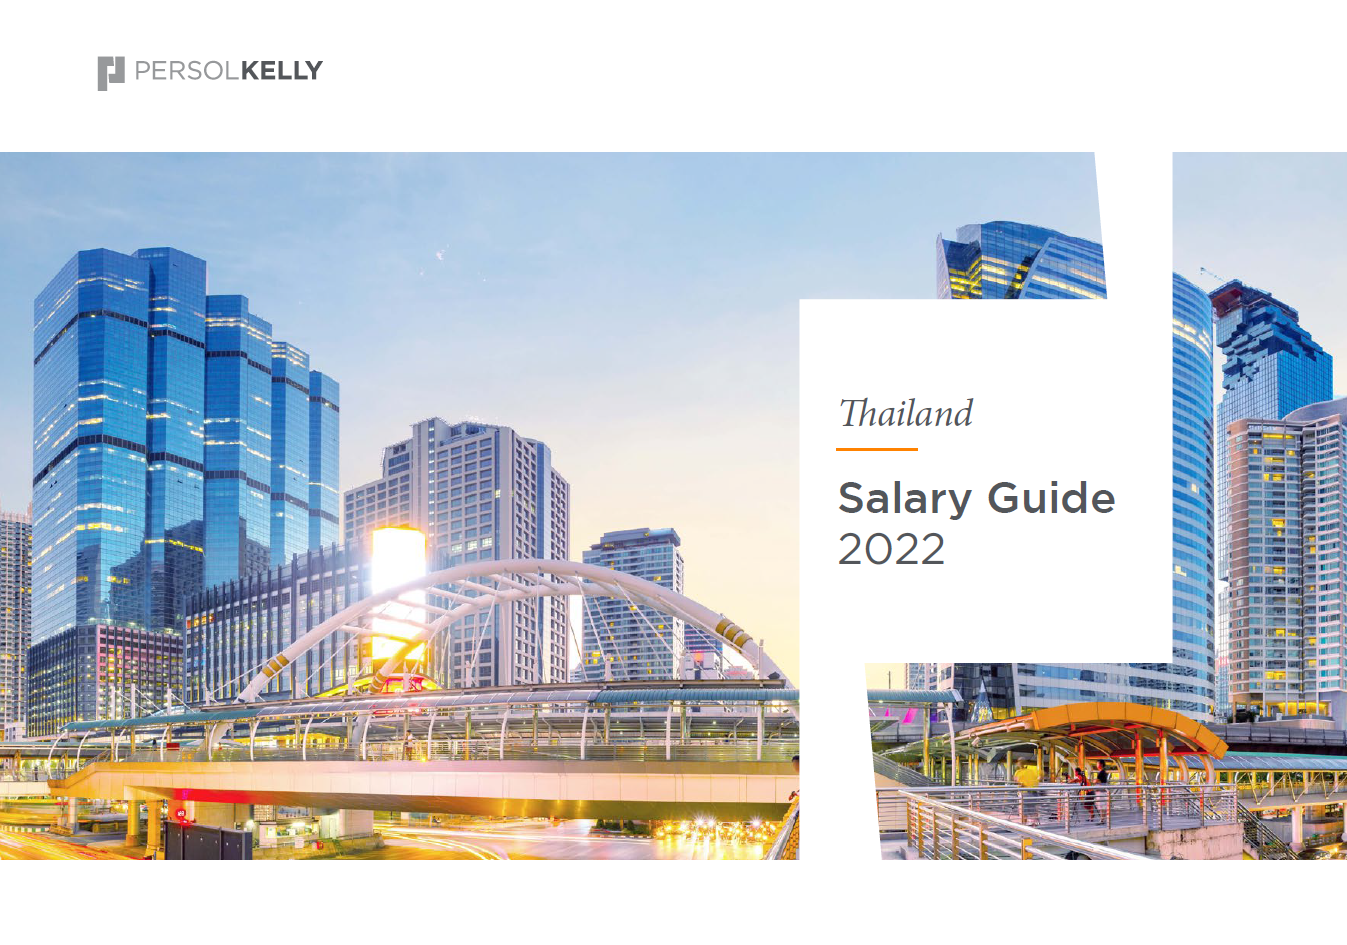 Thailand Salary Guide 2022